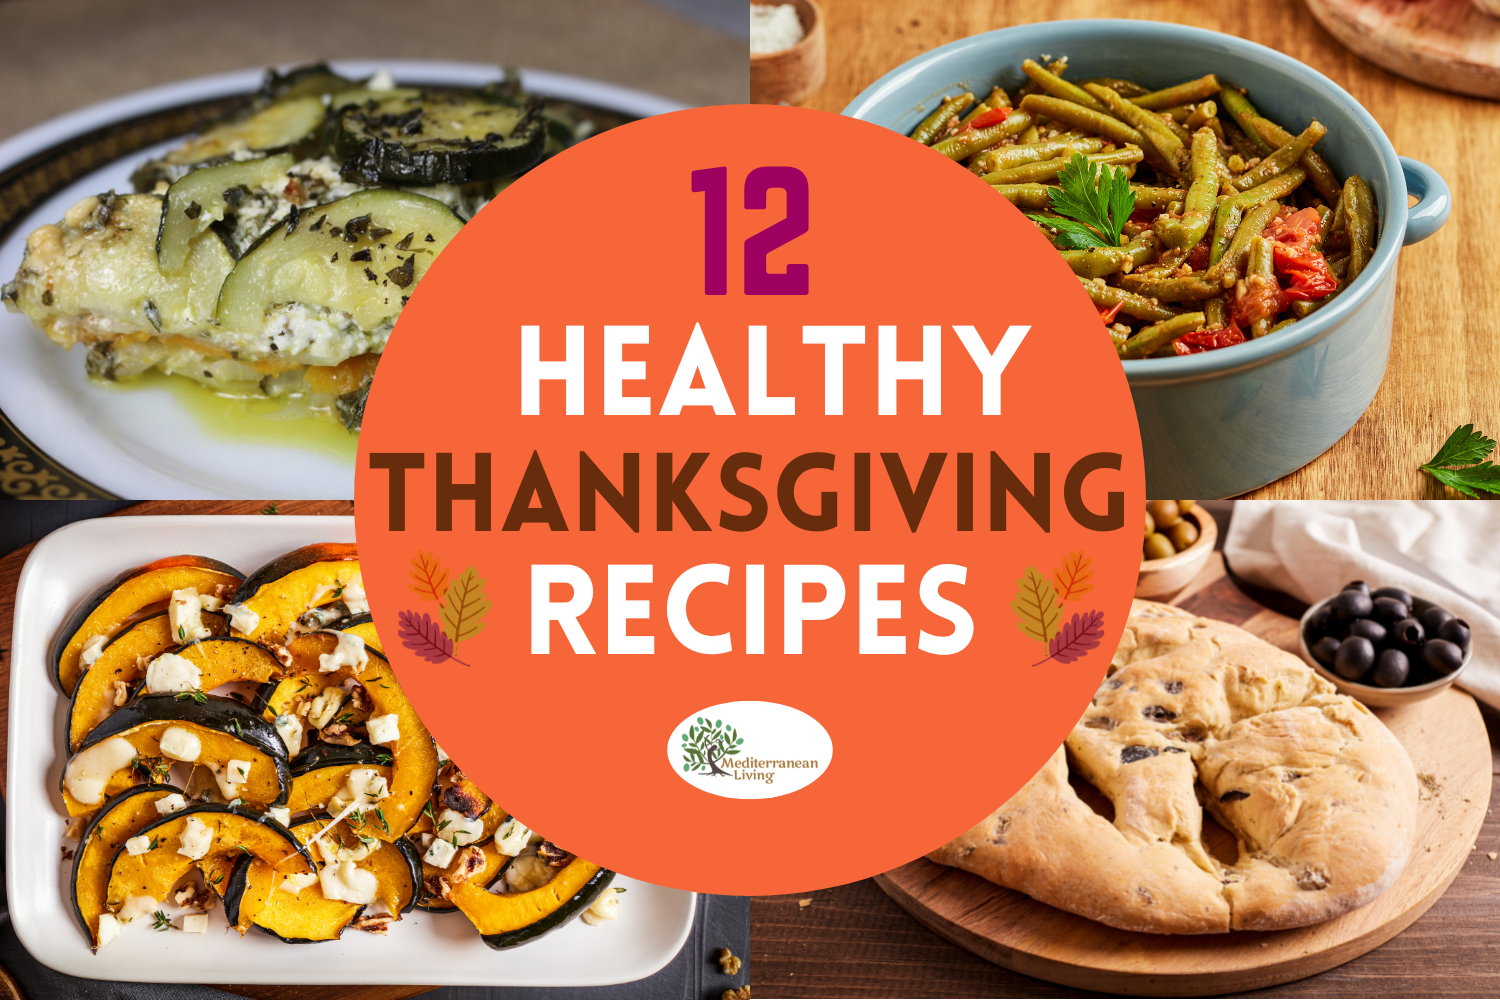 12 Healthy Thanksgiving Recipes (1)